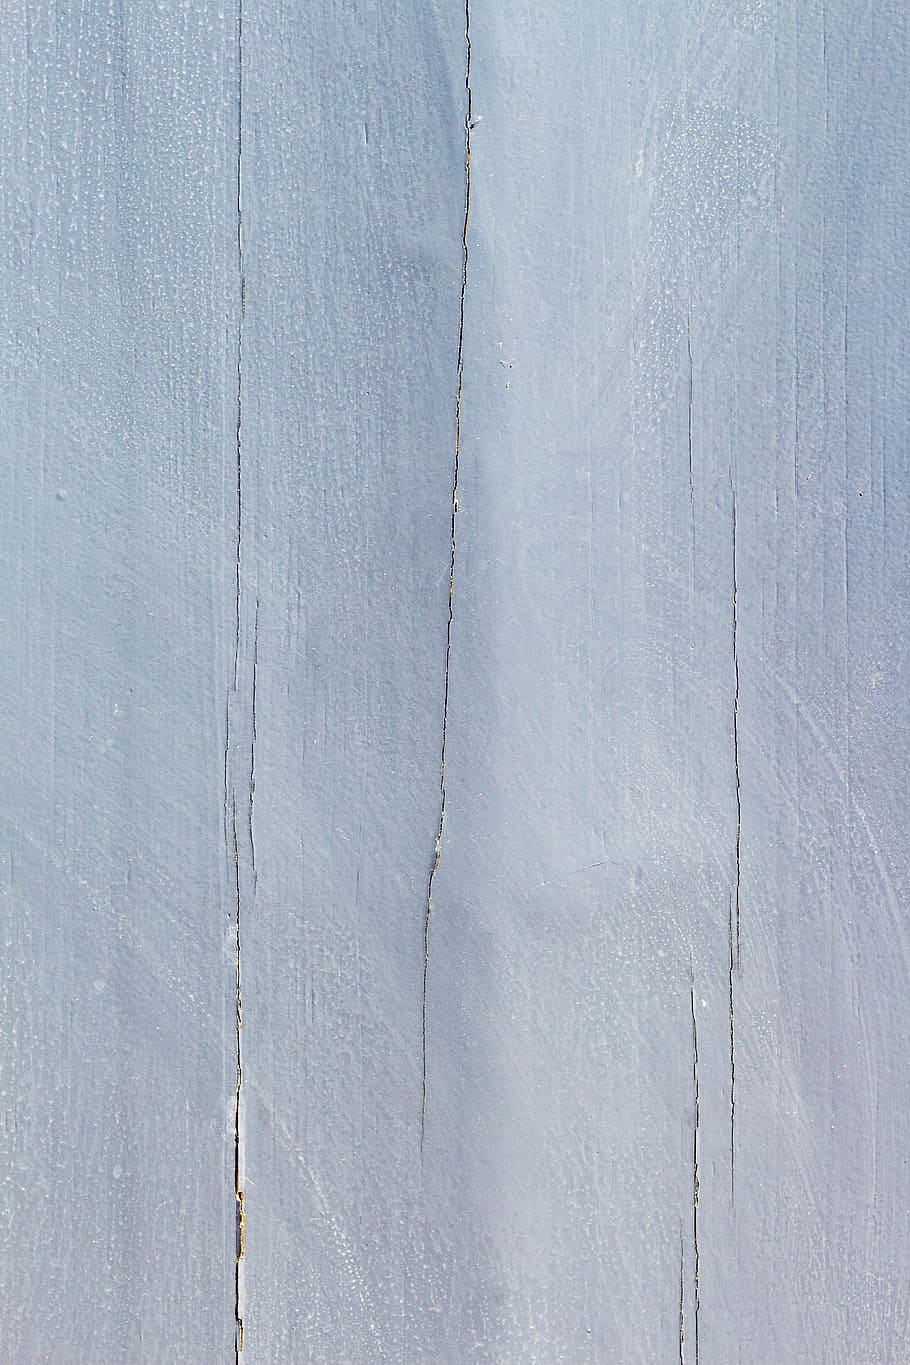 background, pattern, wood, old, structure, texture, textures, background image, boards, wooden structure